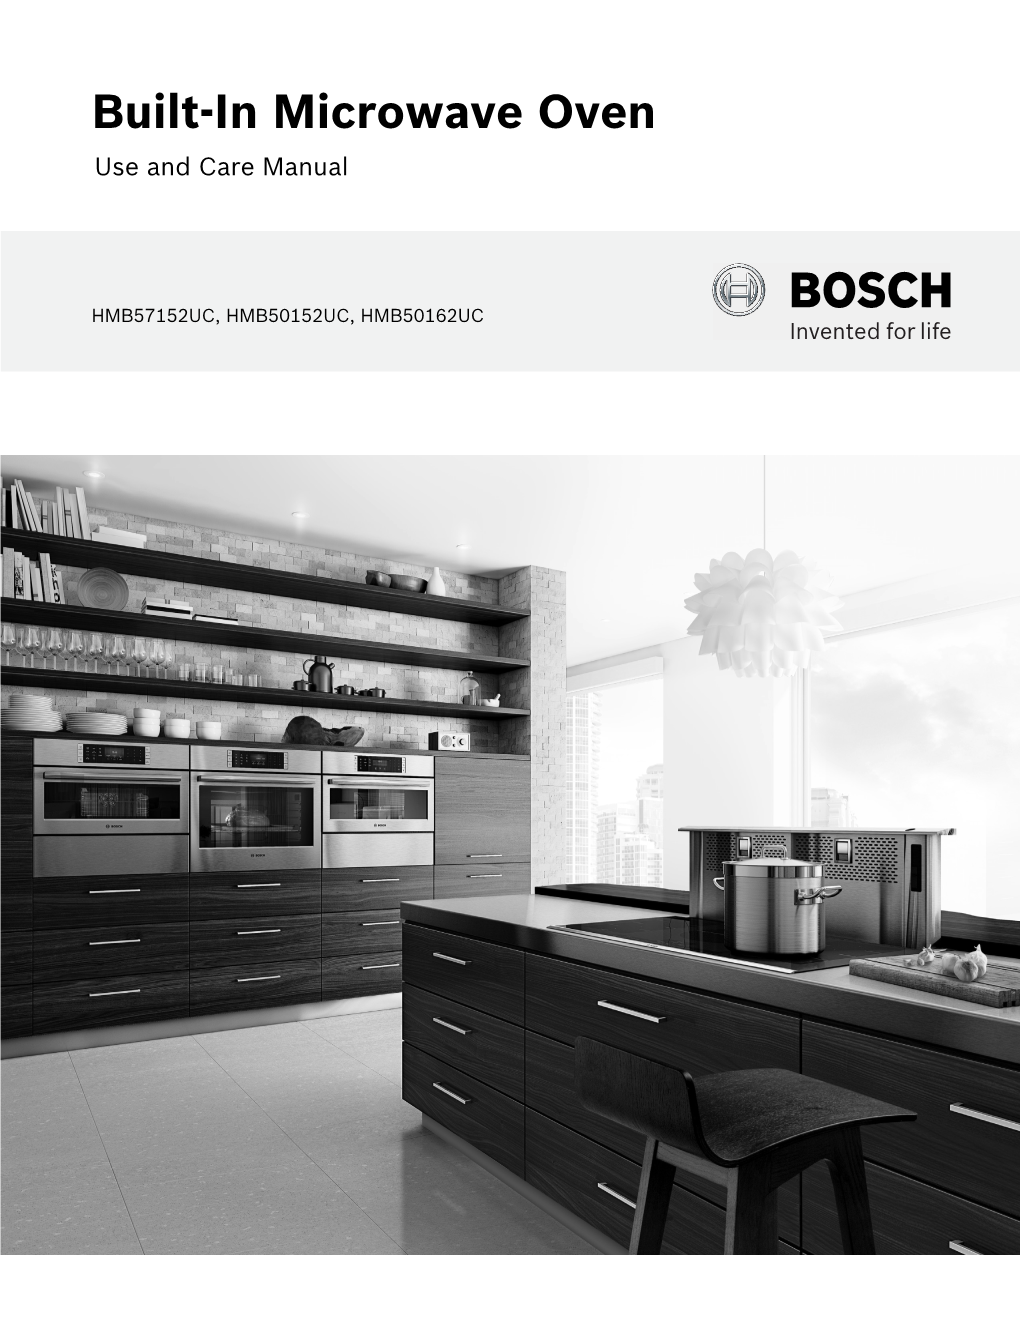 Built-In Microwave Oven Use and Care Manual